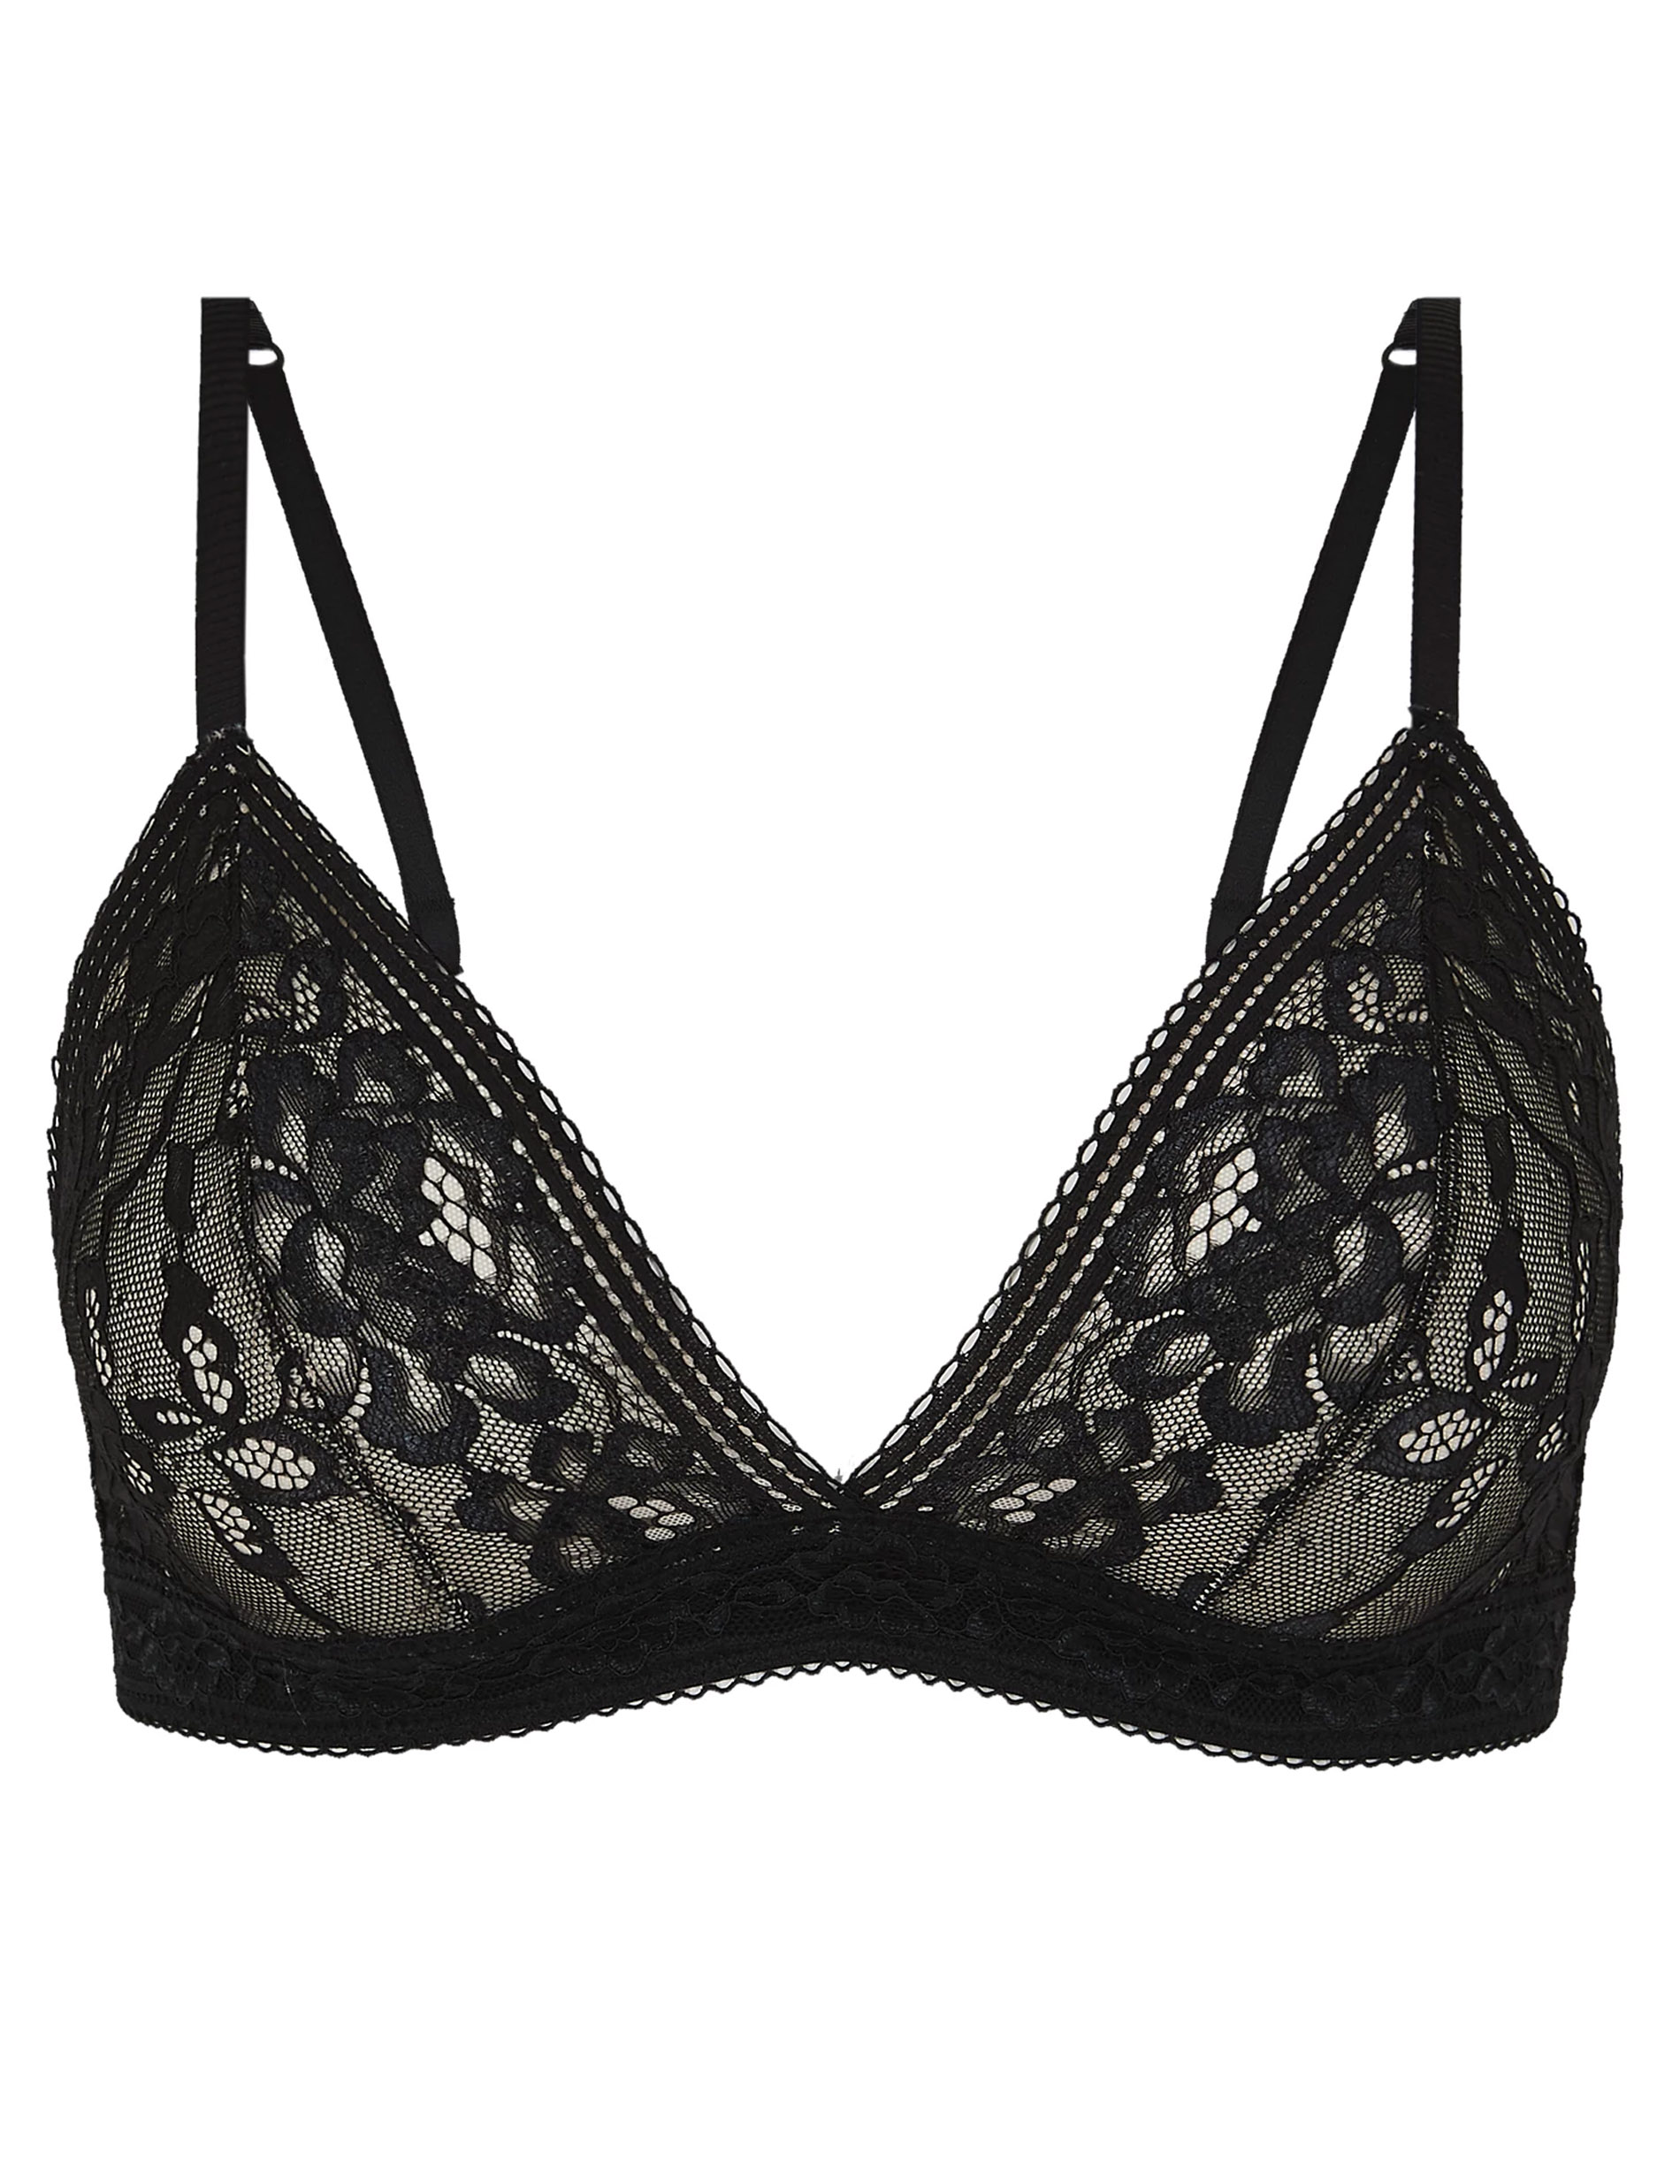 BLACK Lace Non-Wired Bralet - Plus Size 14 to 22